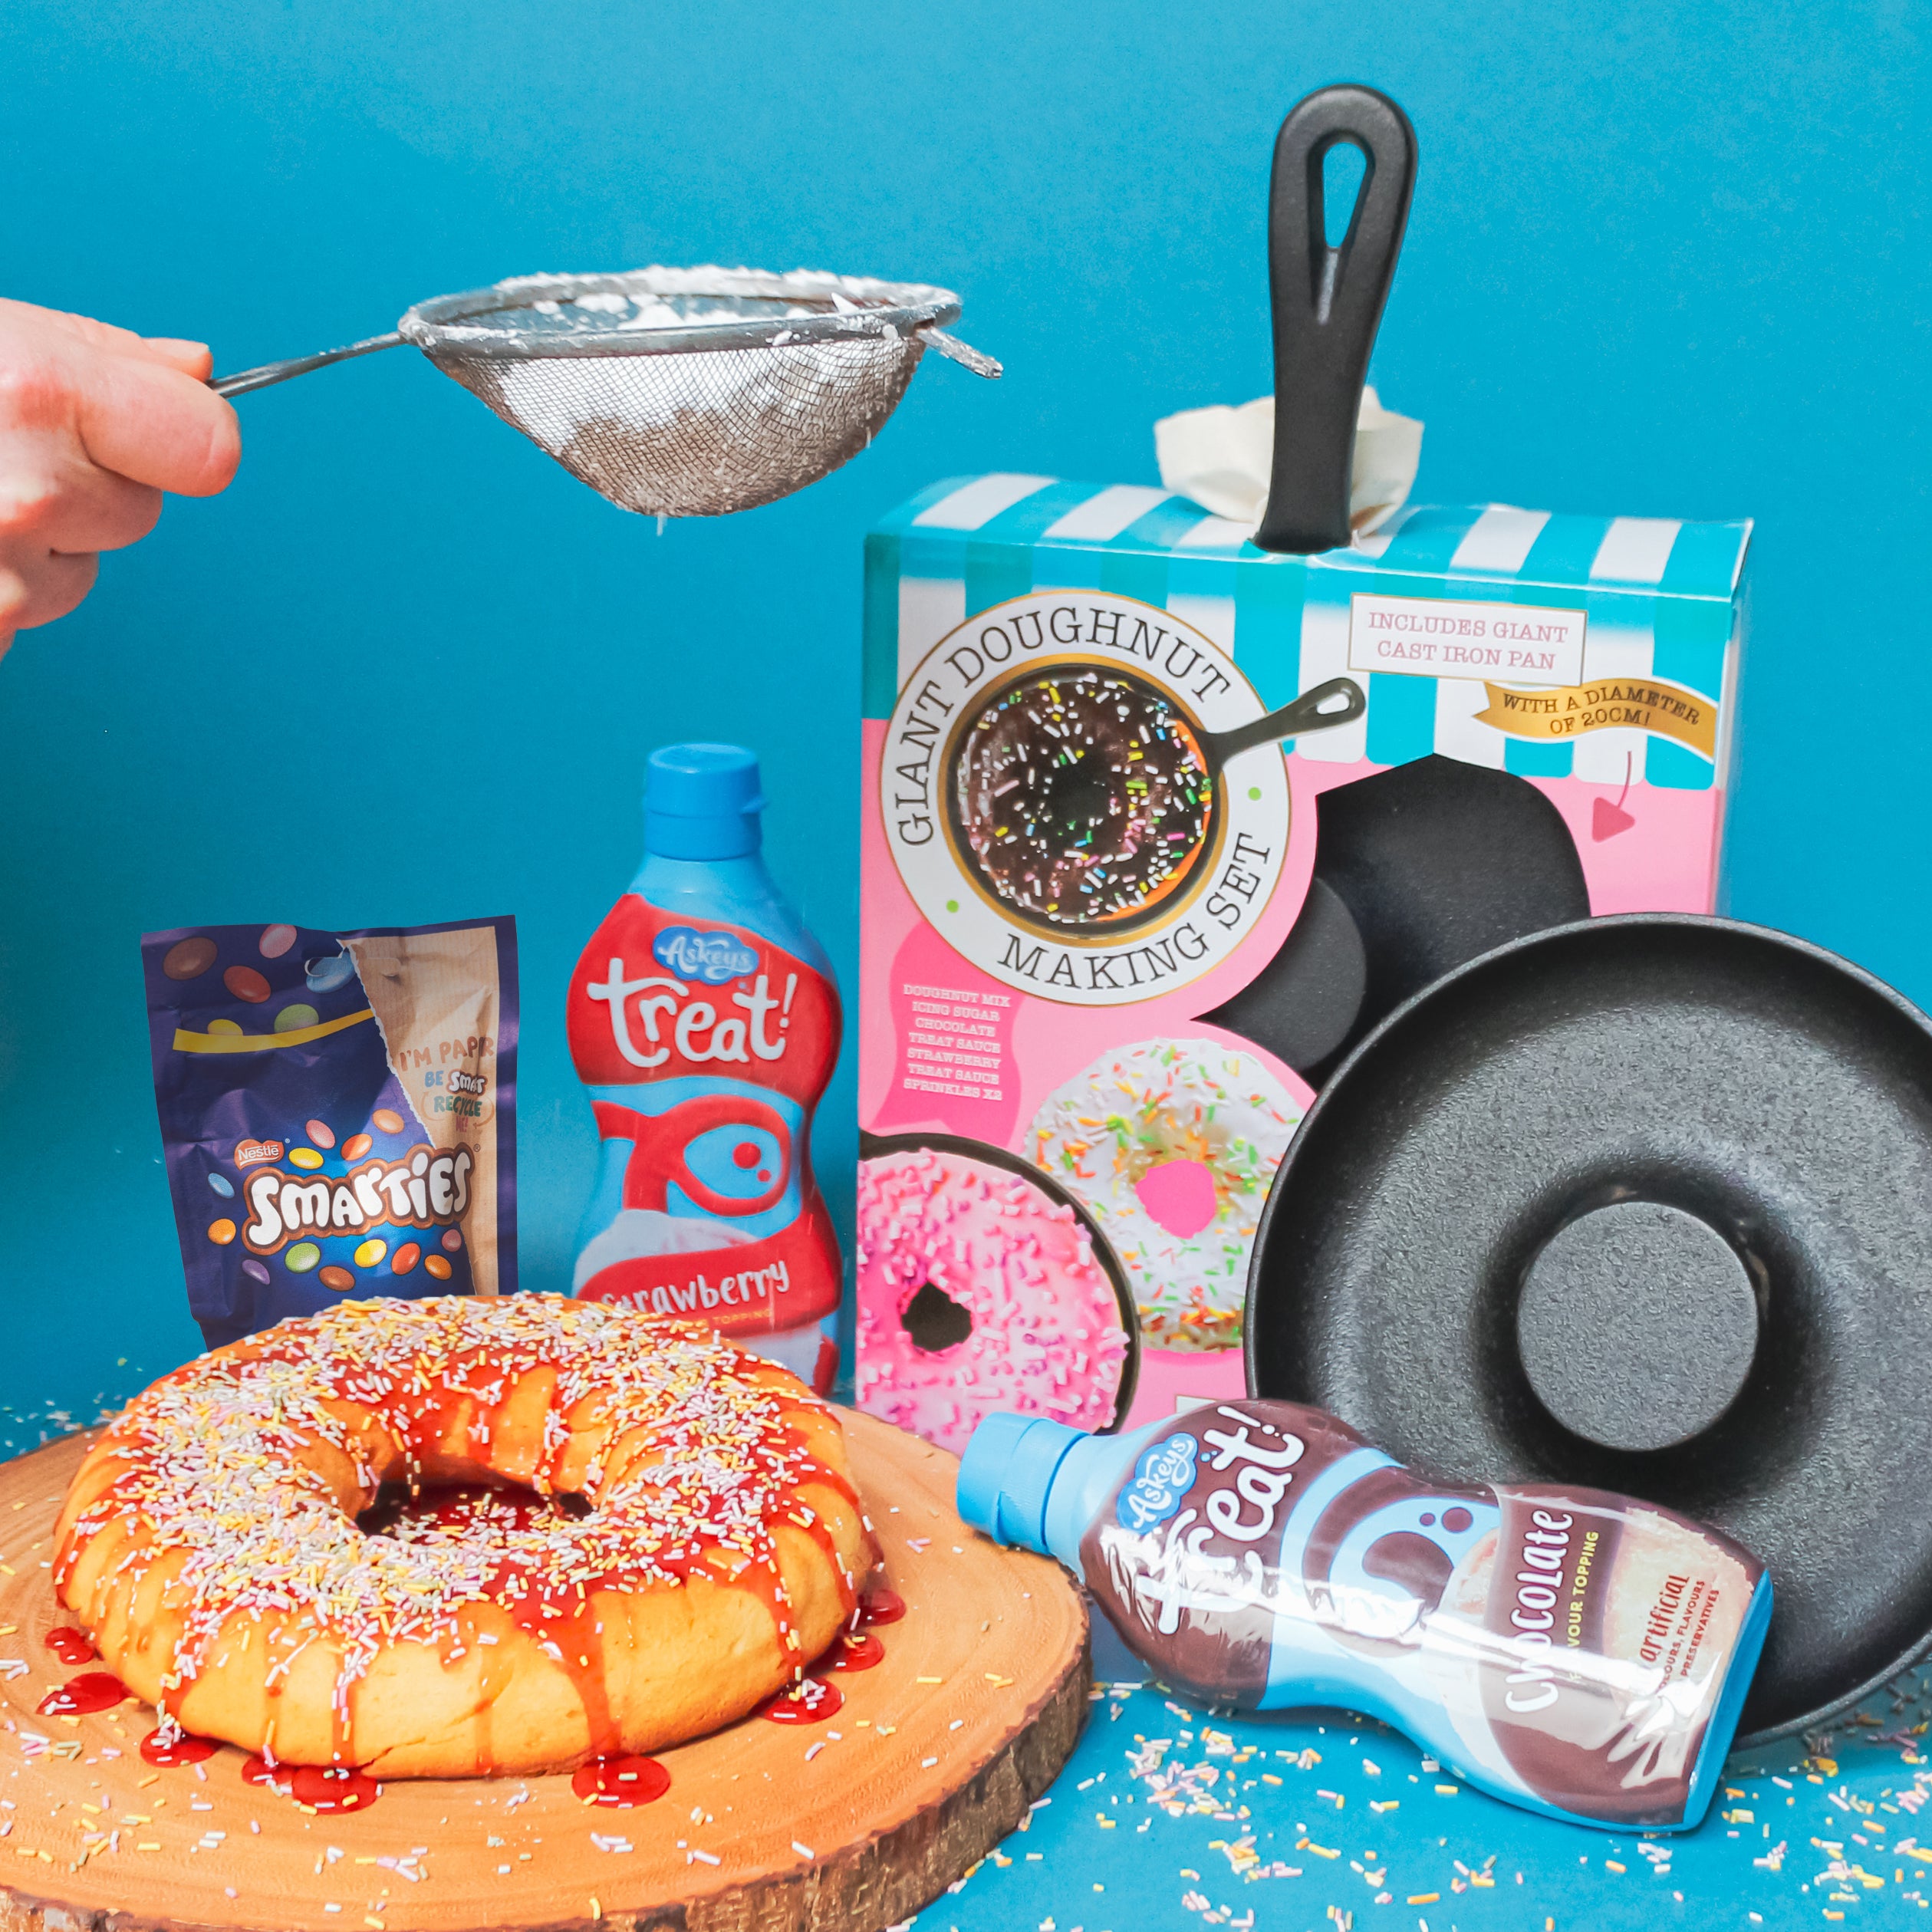 Giant Doughnut Maker - With Smarties!